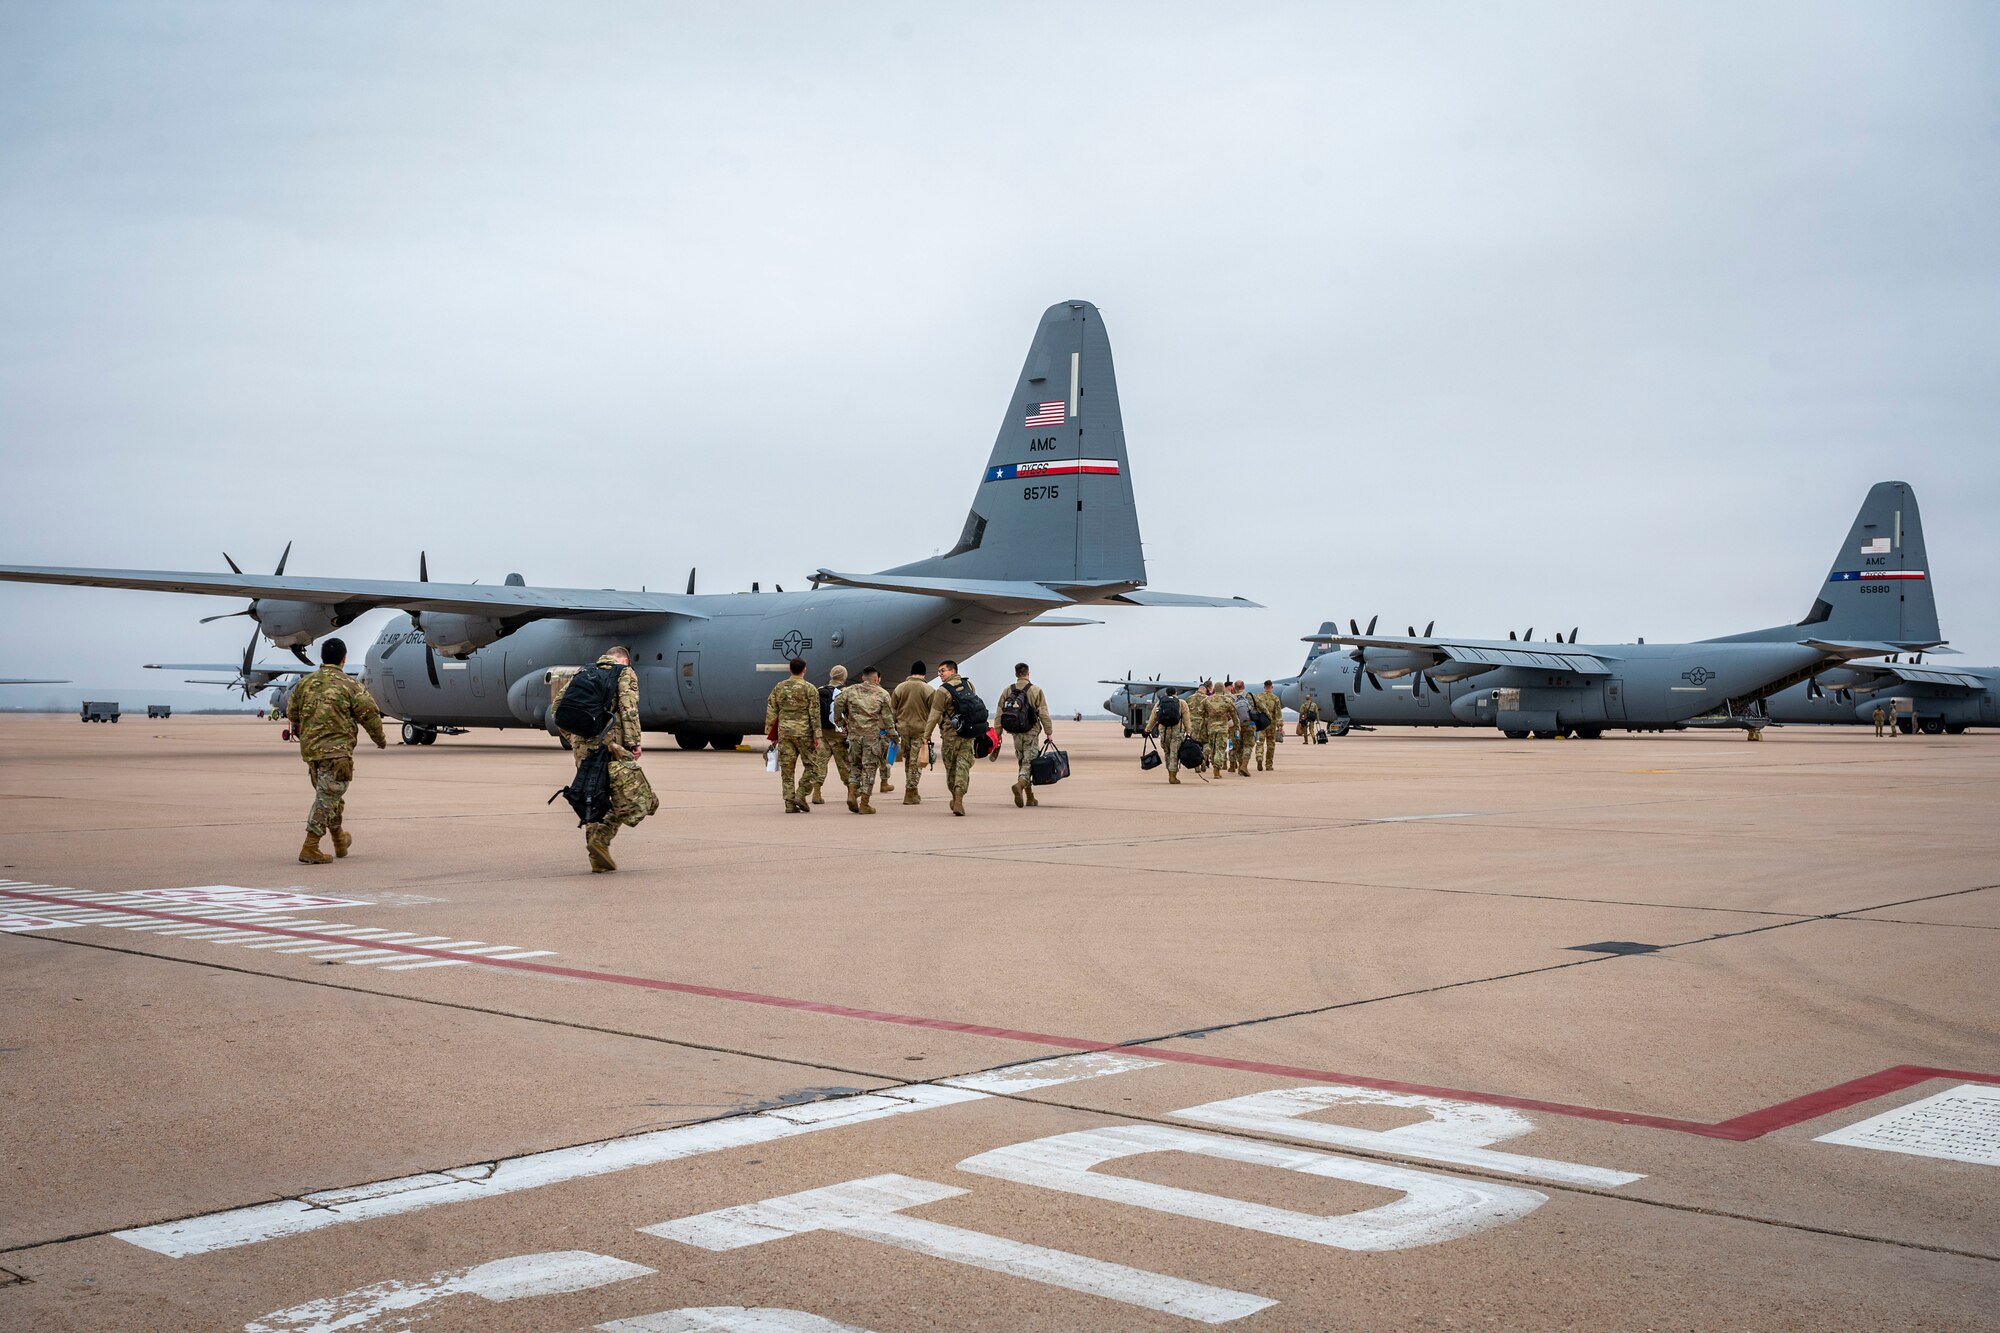 U.S. Air Force Airmen assigned to the 317th Airlift Wing walk on the flightline towards a C-130J Super Hercules before leaving for a deployment at Dyess Air Force Base, Texas, Feb. 25, 2023. Members from the 317th were deployed to the Middle East in support of the U.S. Central Command’s continued mission of enabling military operations and activities with allies and partners to increase regional security and stability in support of enduring U.S. interests. (U.S. Air Force photo by Senior Airman Leon Redfern)